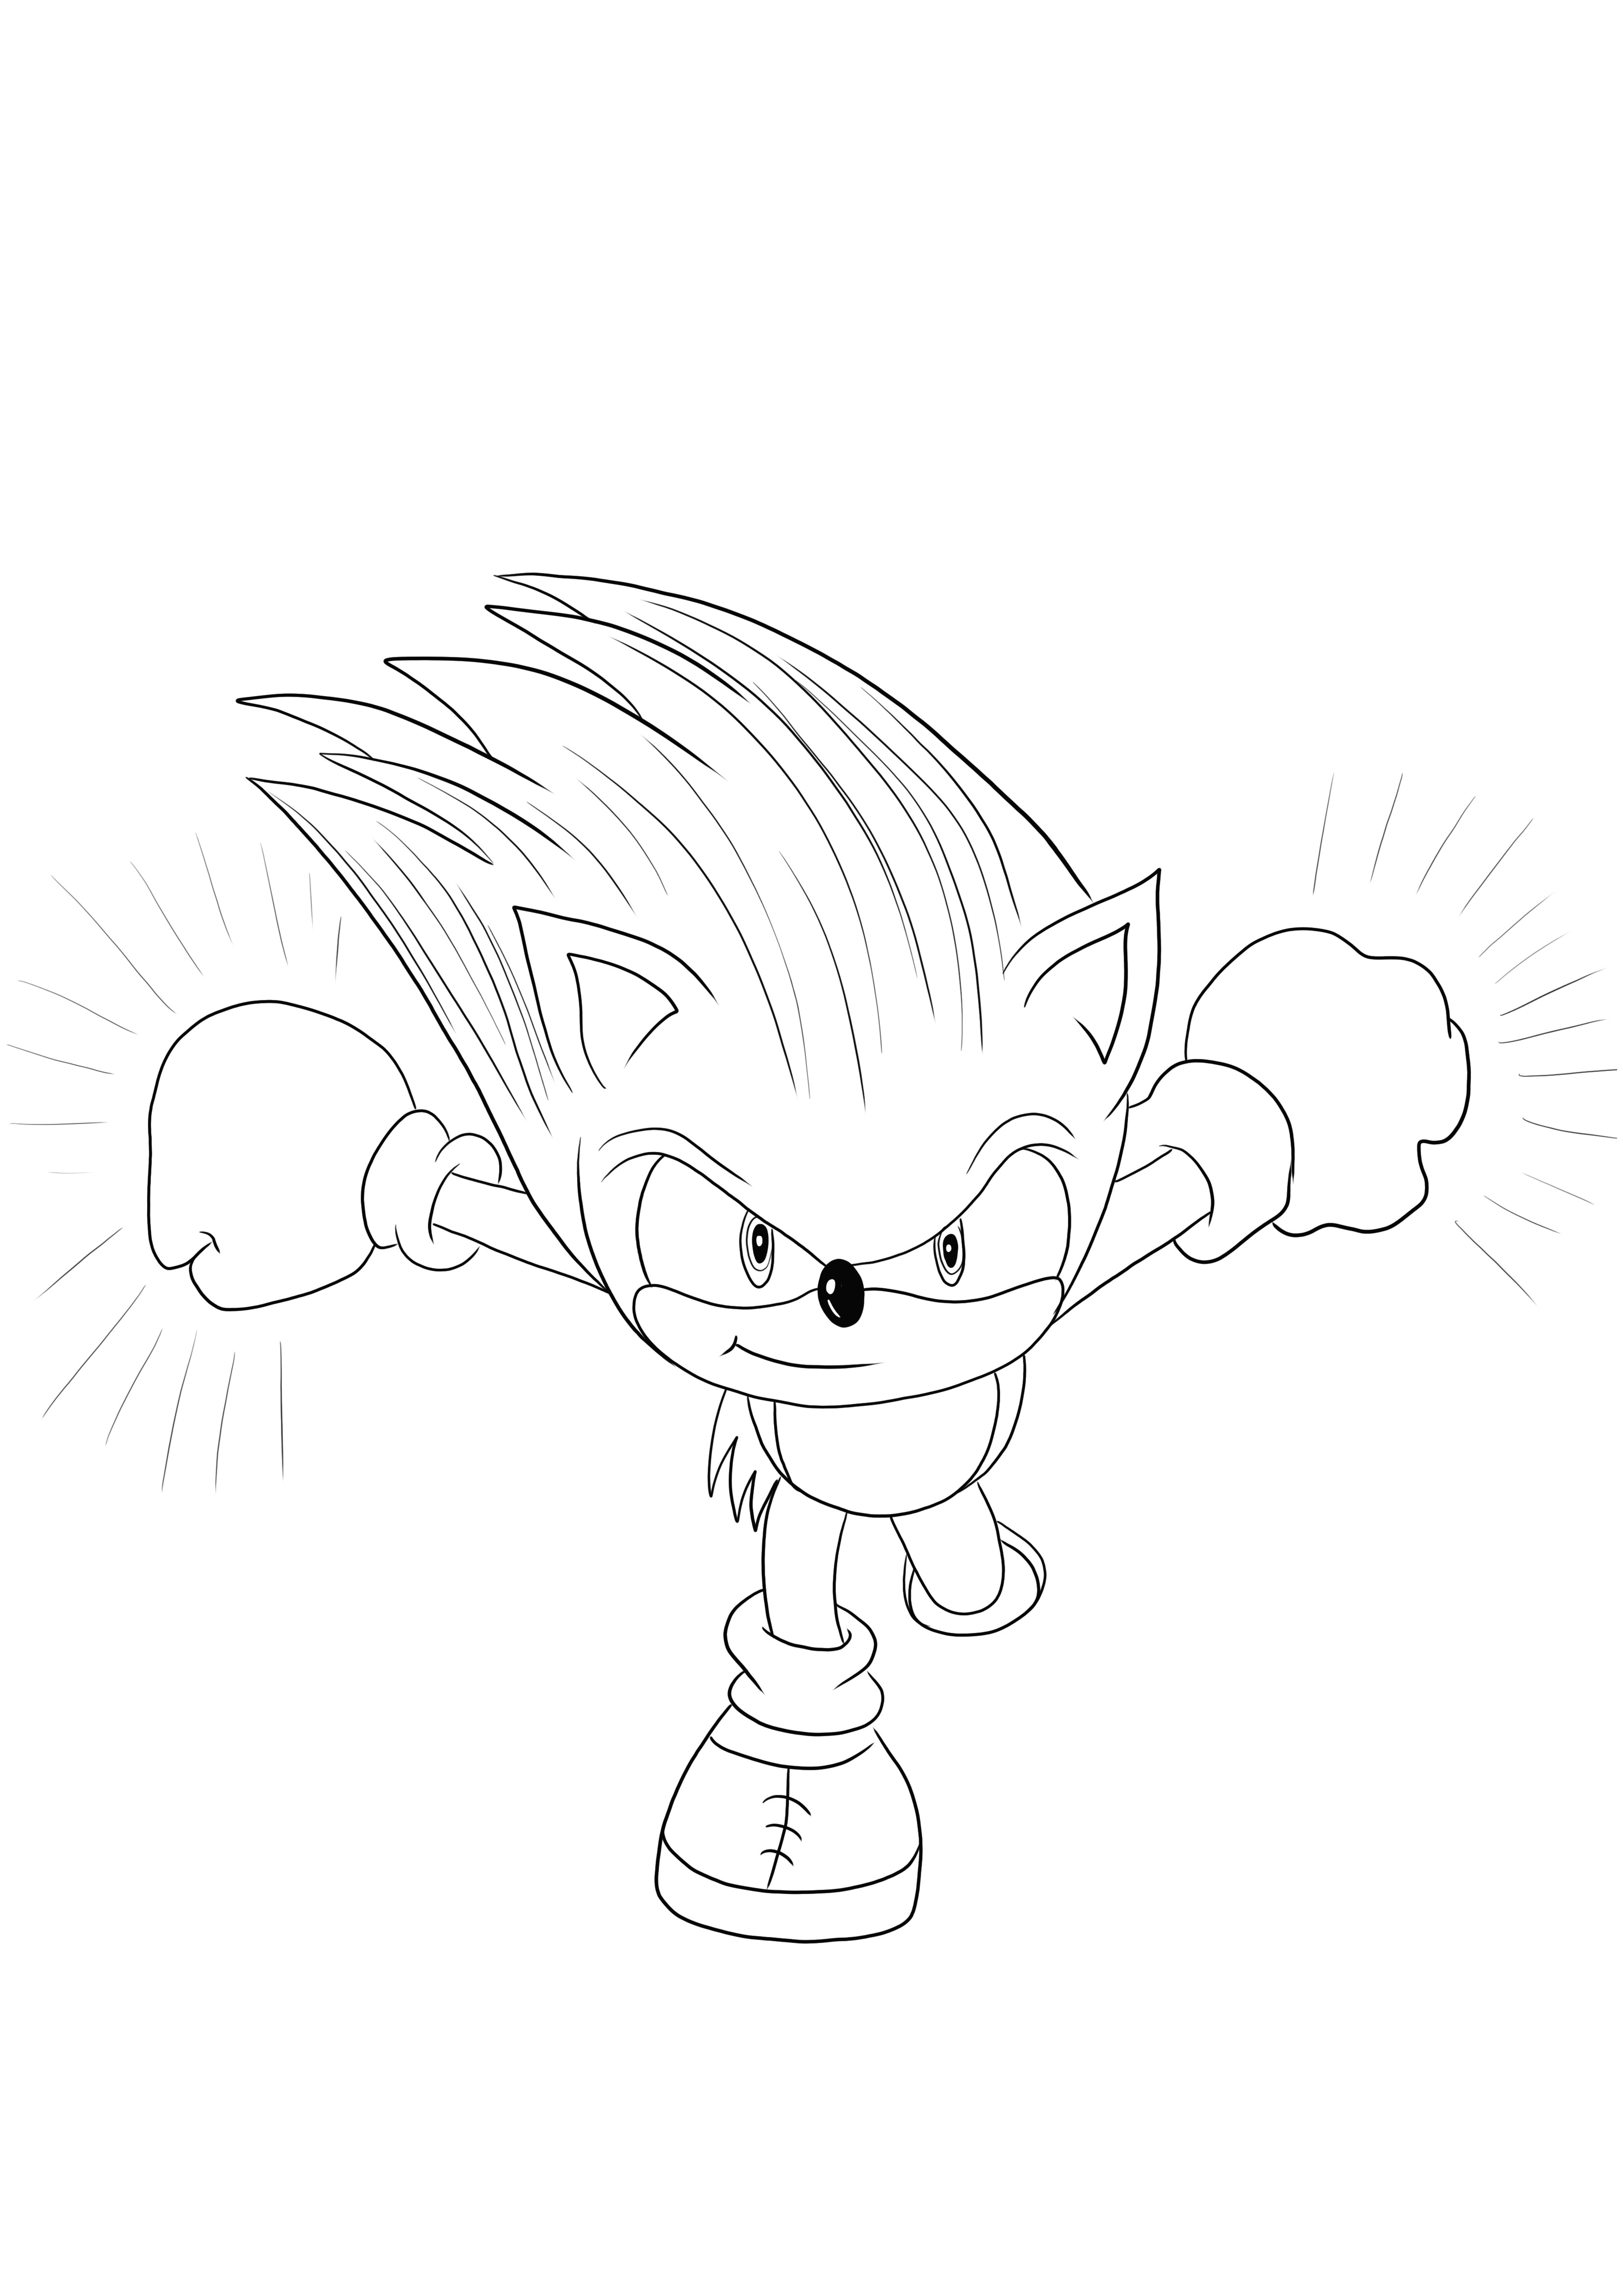 Sonic-for coloring and free printing or downloading for all age kids